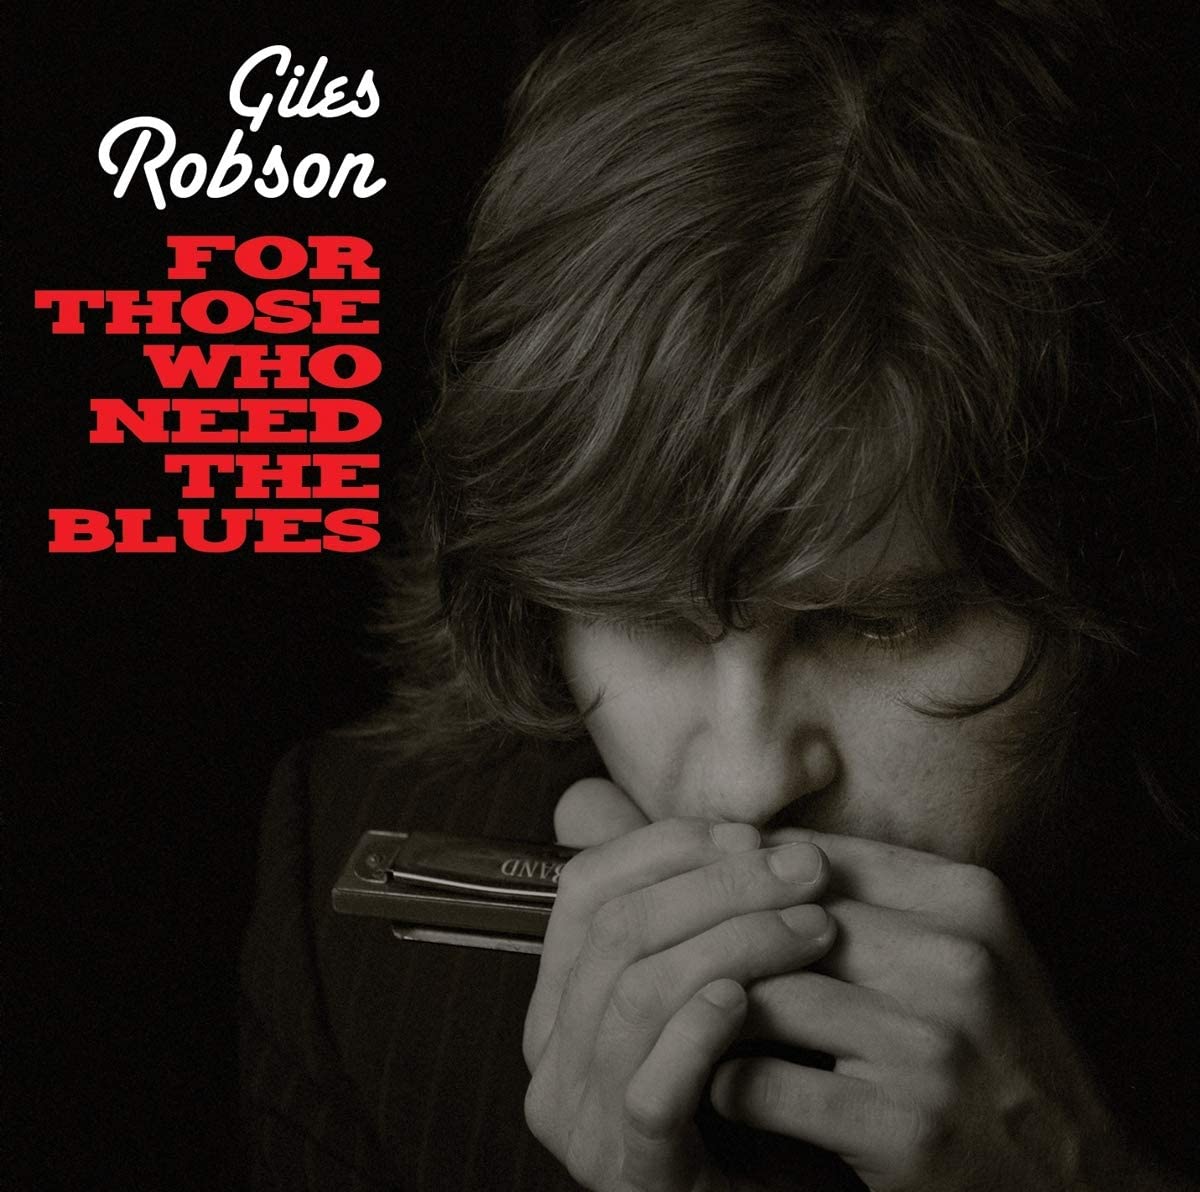 For those who need the blues - Giles Robson